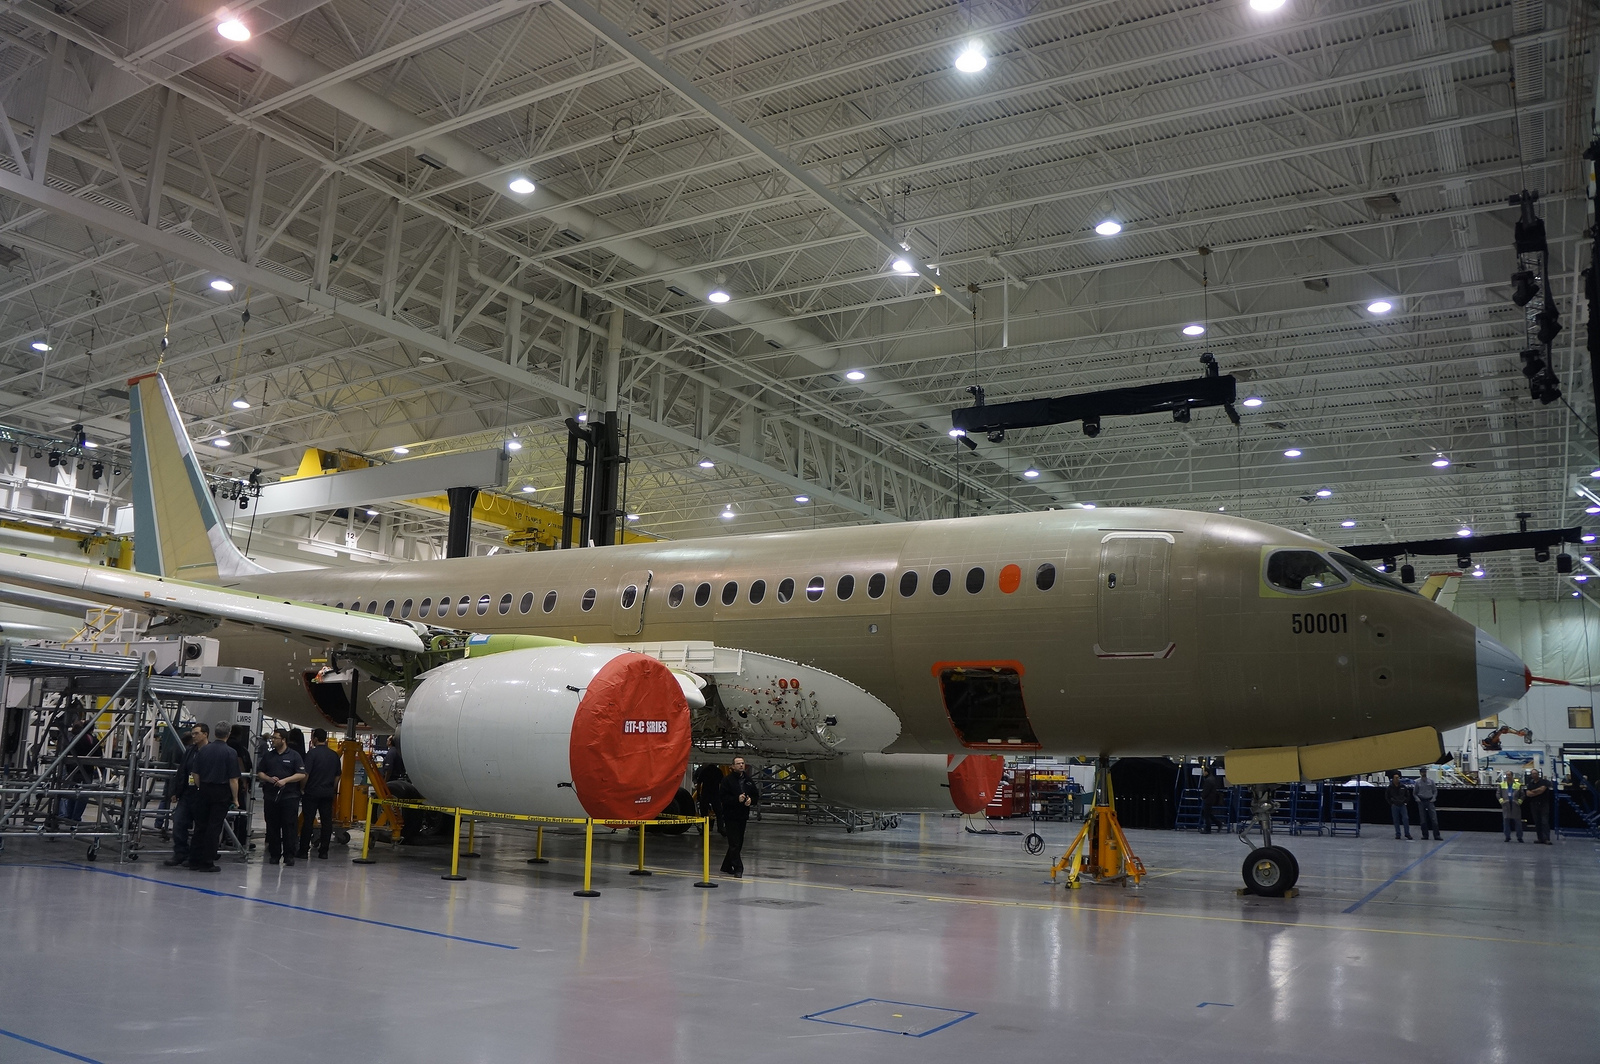 The new Bombardier CSeries in Montreal. Photo by Chris Sloan / Airchive.com.